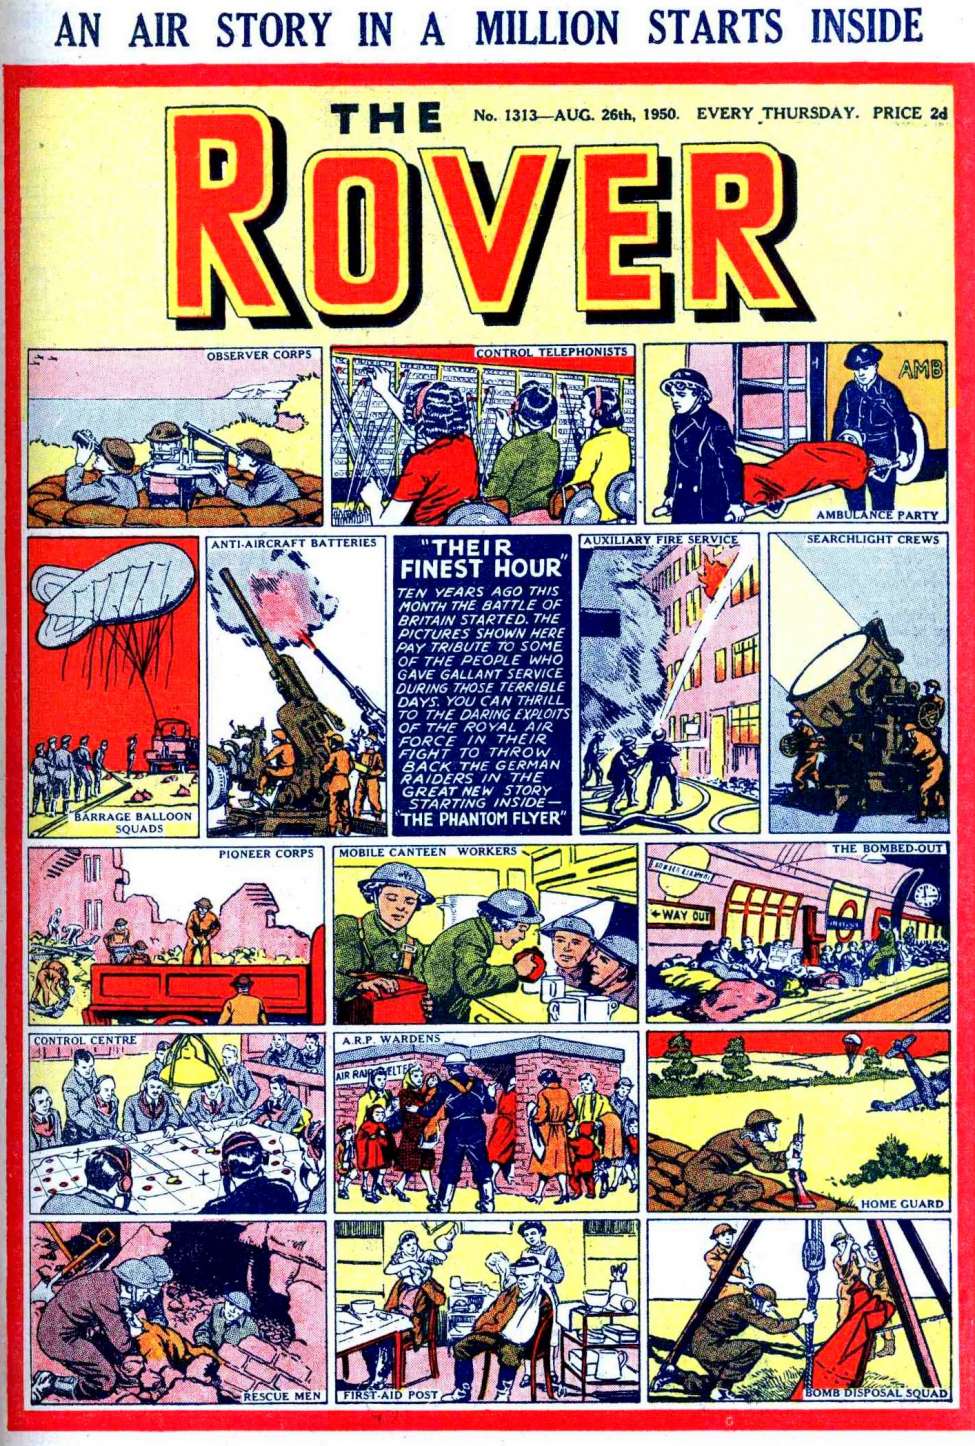 Book Cover For The Rover 1313